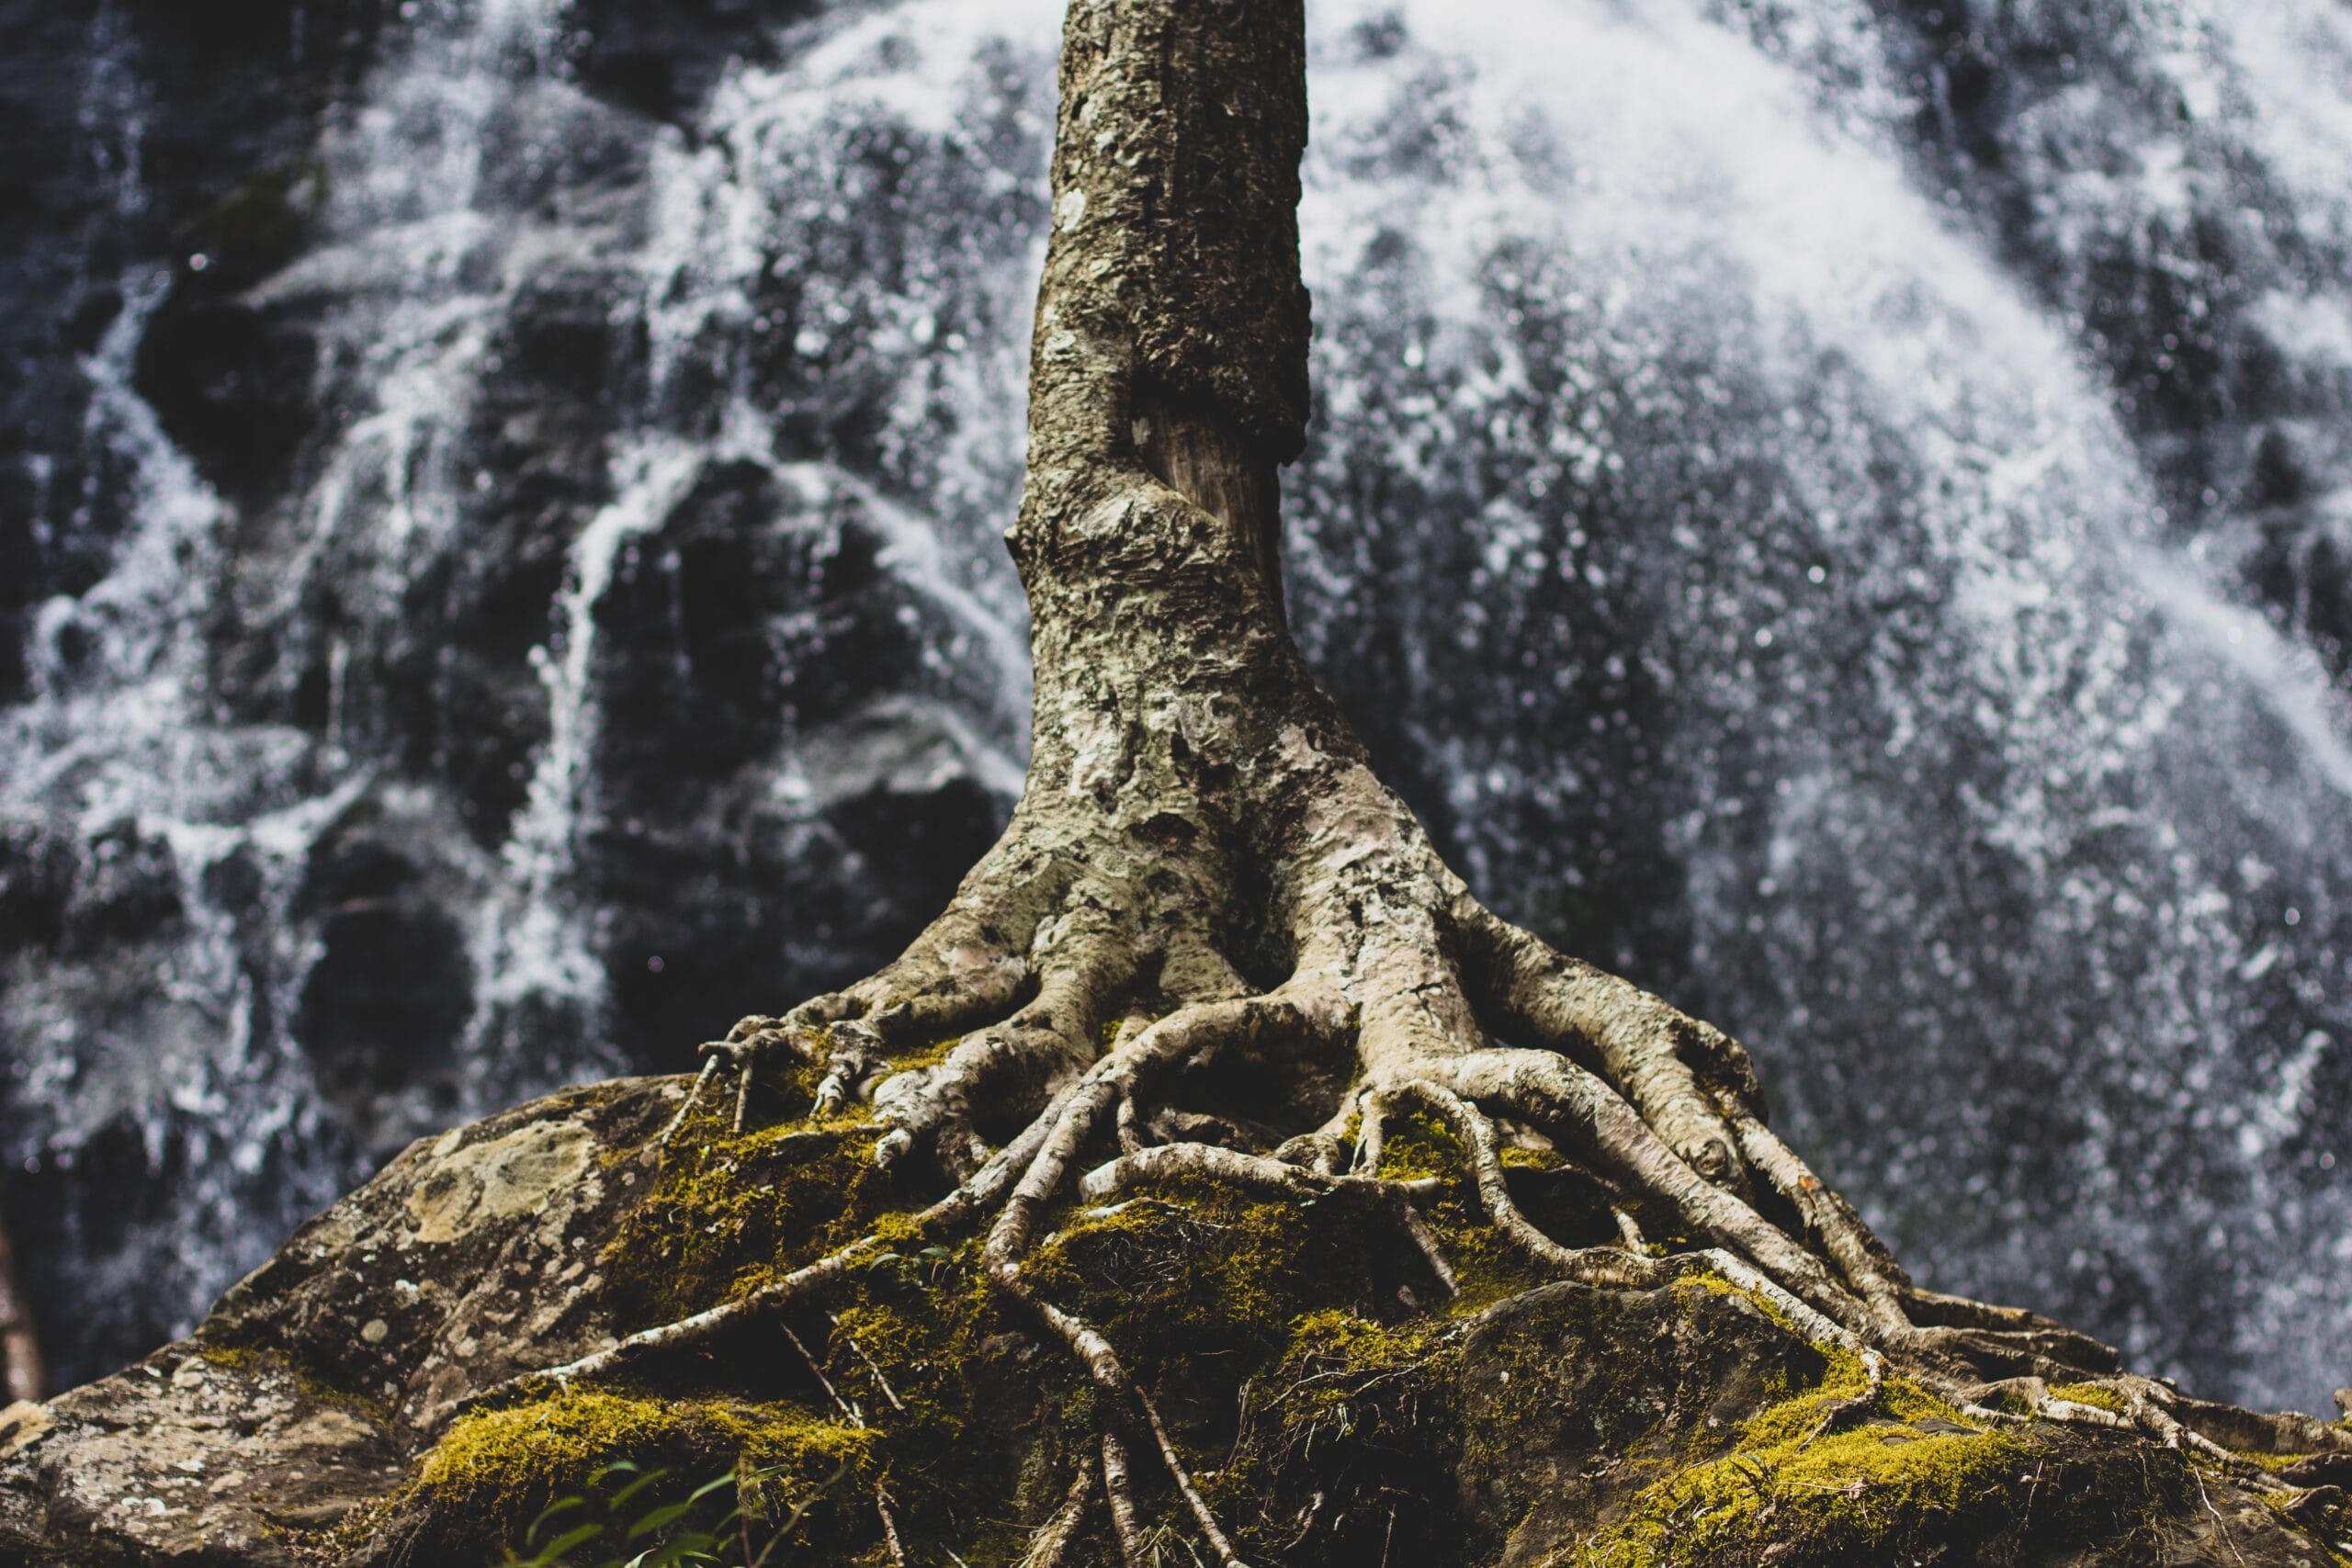 The exposed roots of an old tree, with moss growing around it on rocky terrain.